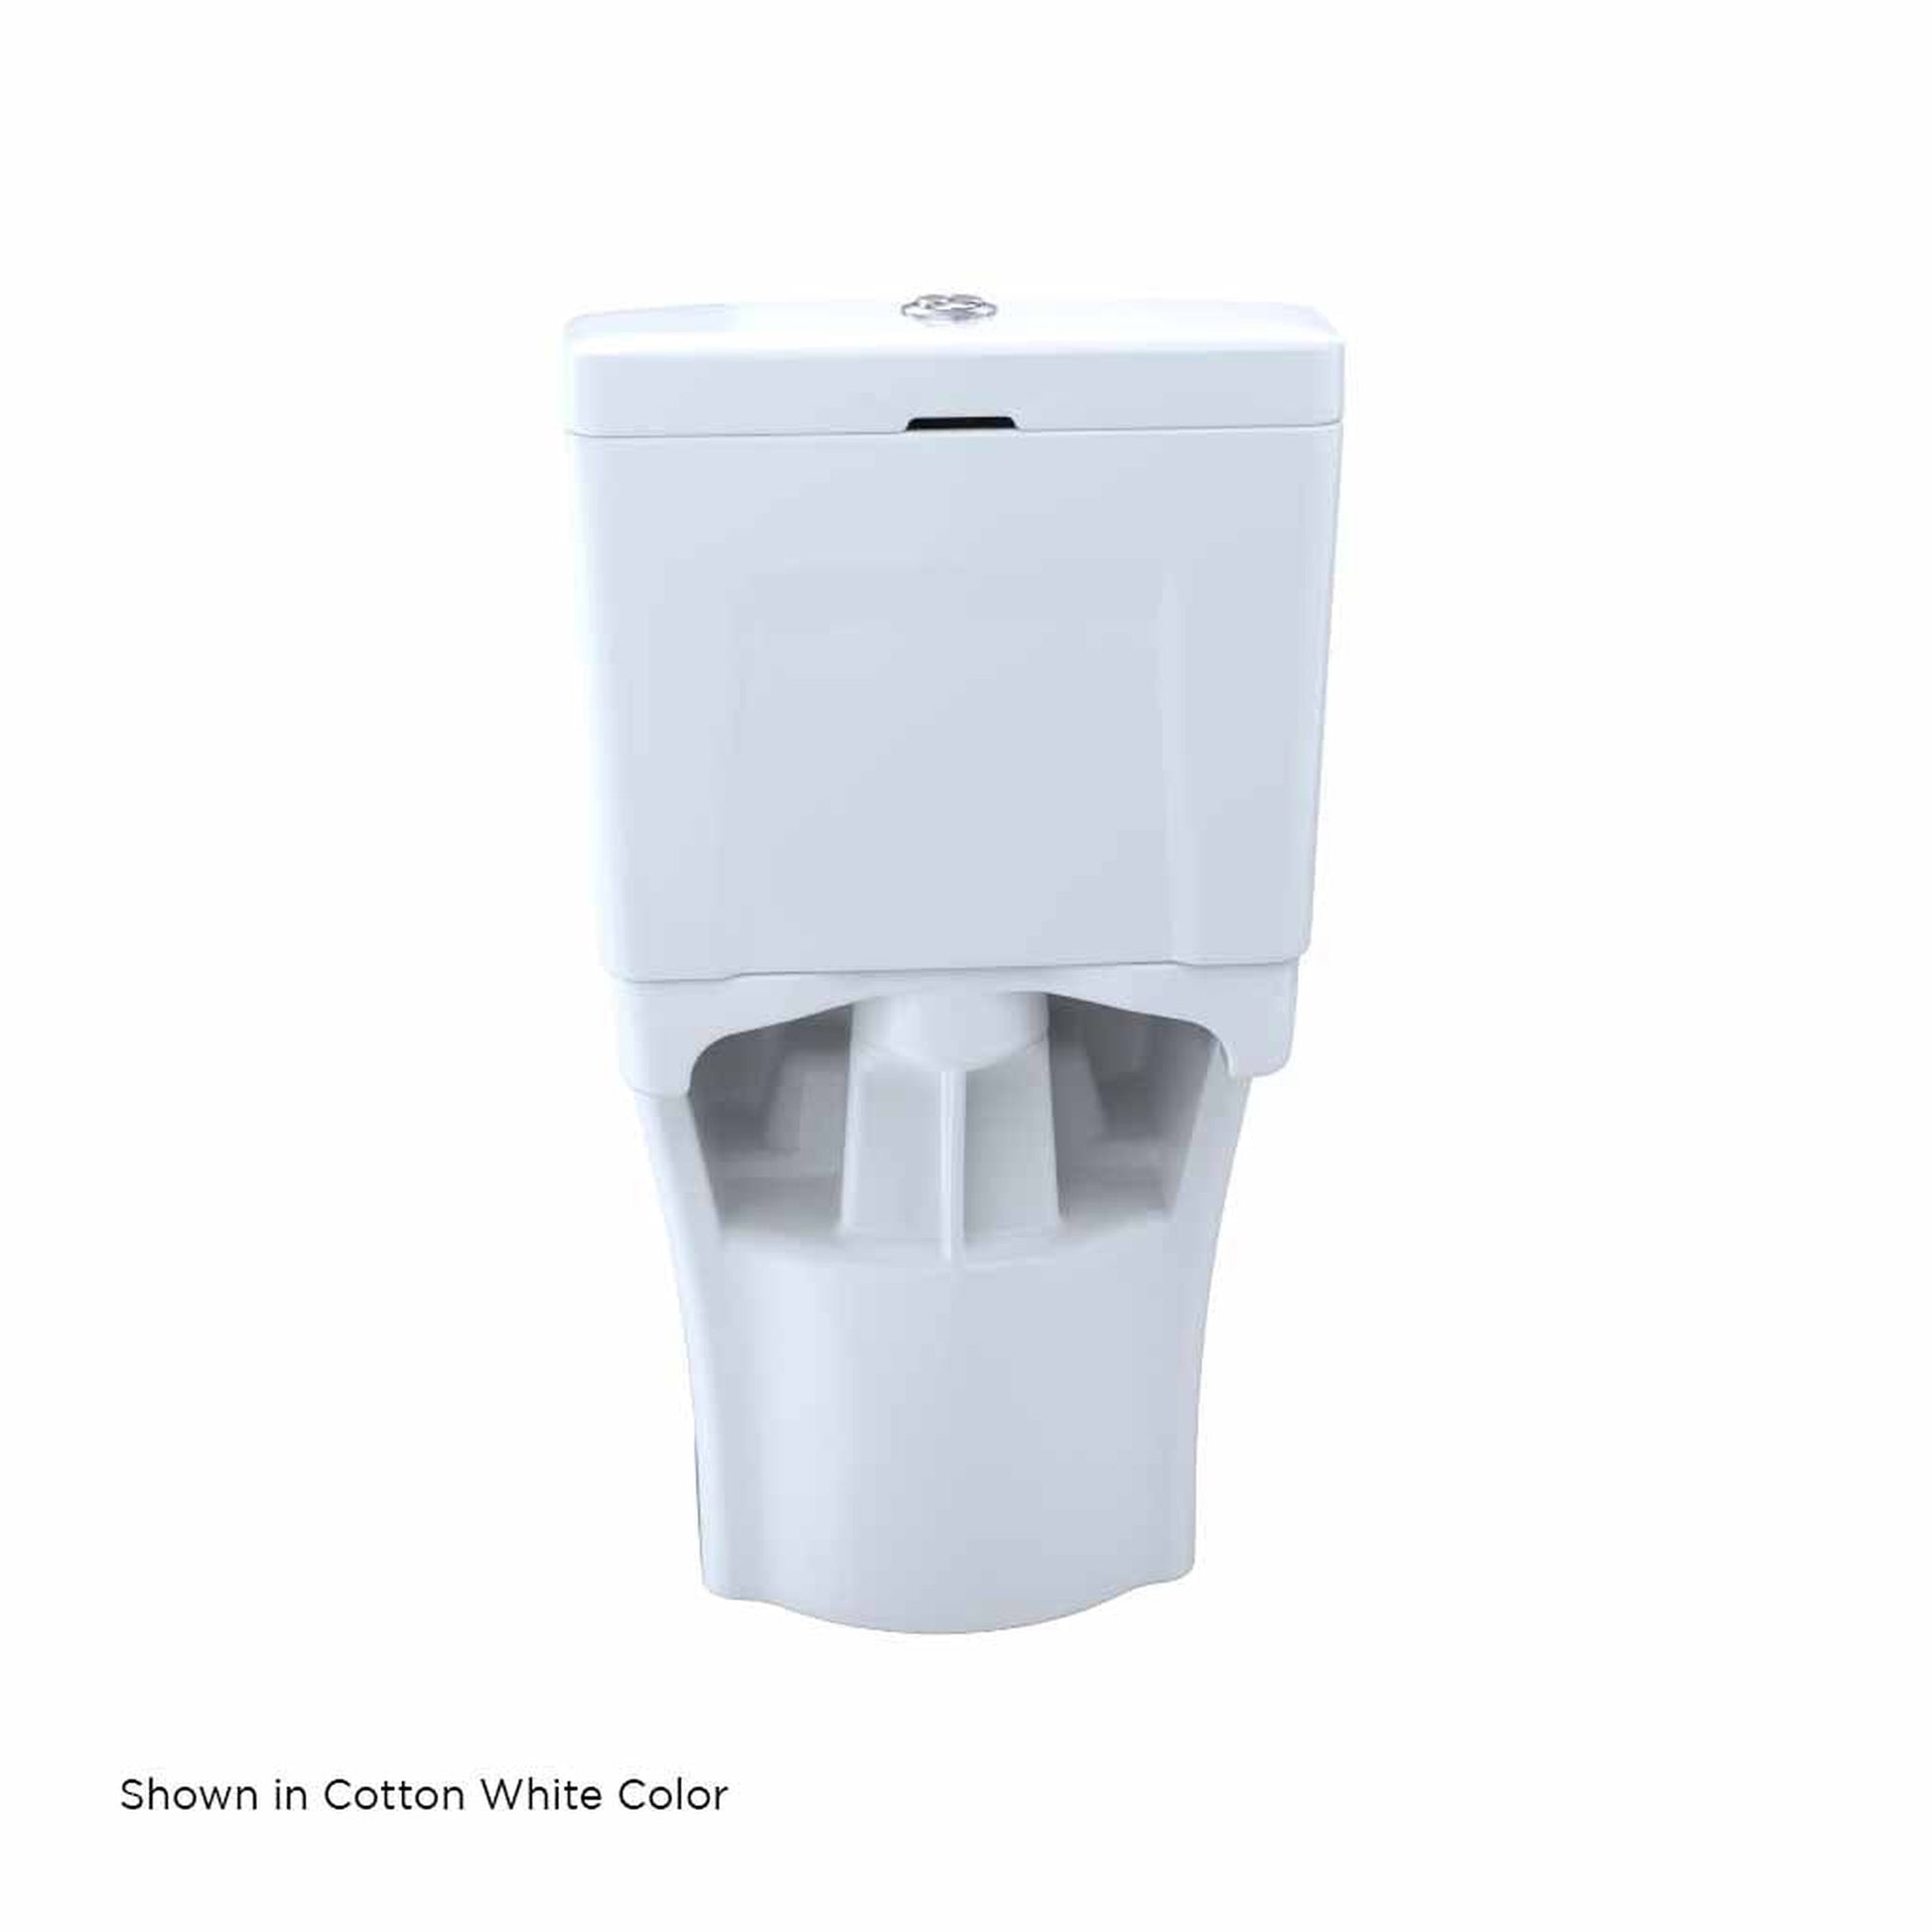 TOTO Aquia IV Colonial White 1.0 GPF & 0.8 GPF Dual-Flush Two-Piece Elongated Toilet With WASHLET+ Connection - SoftClose Seat Included